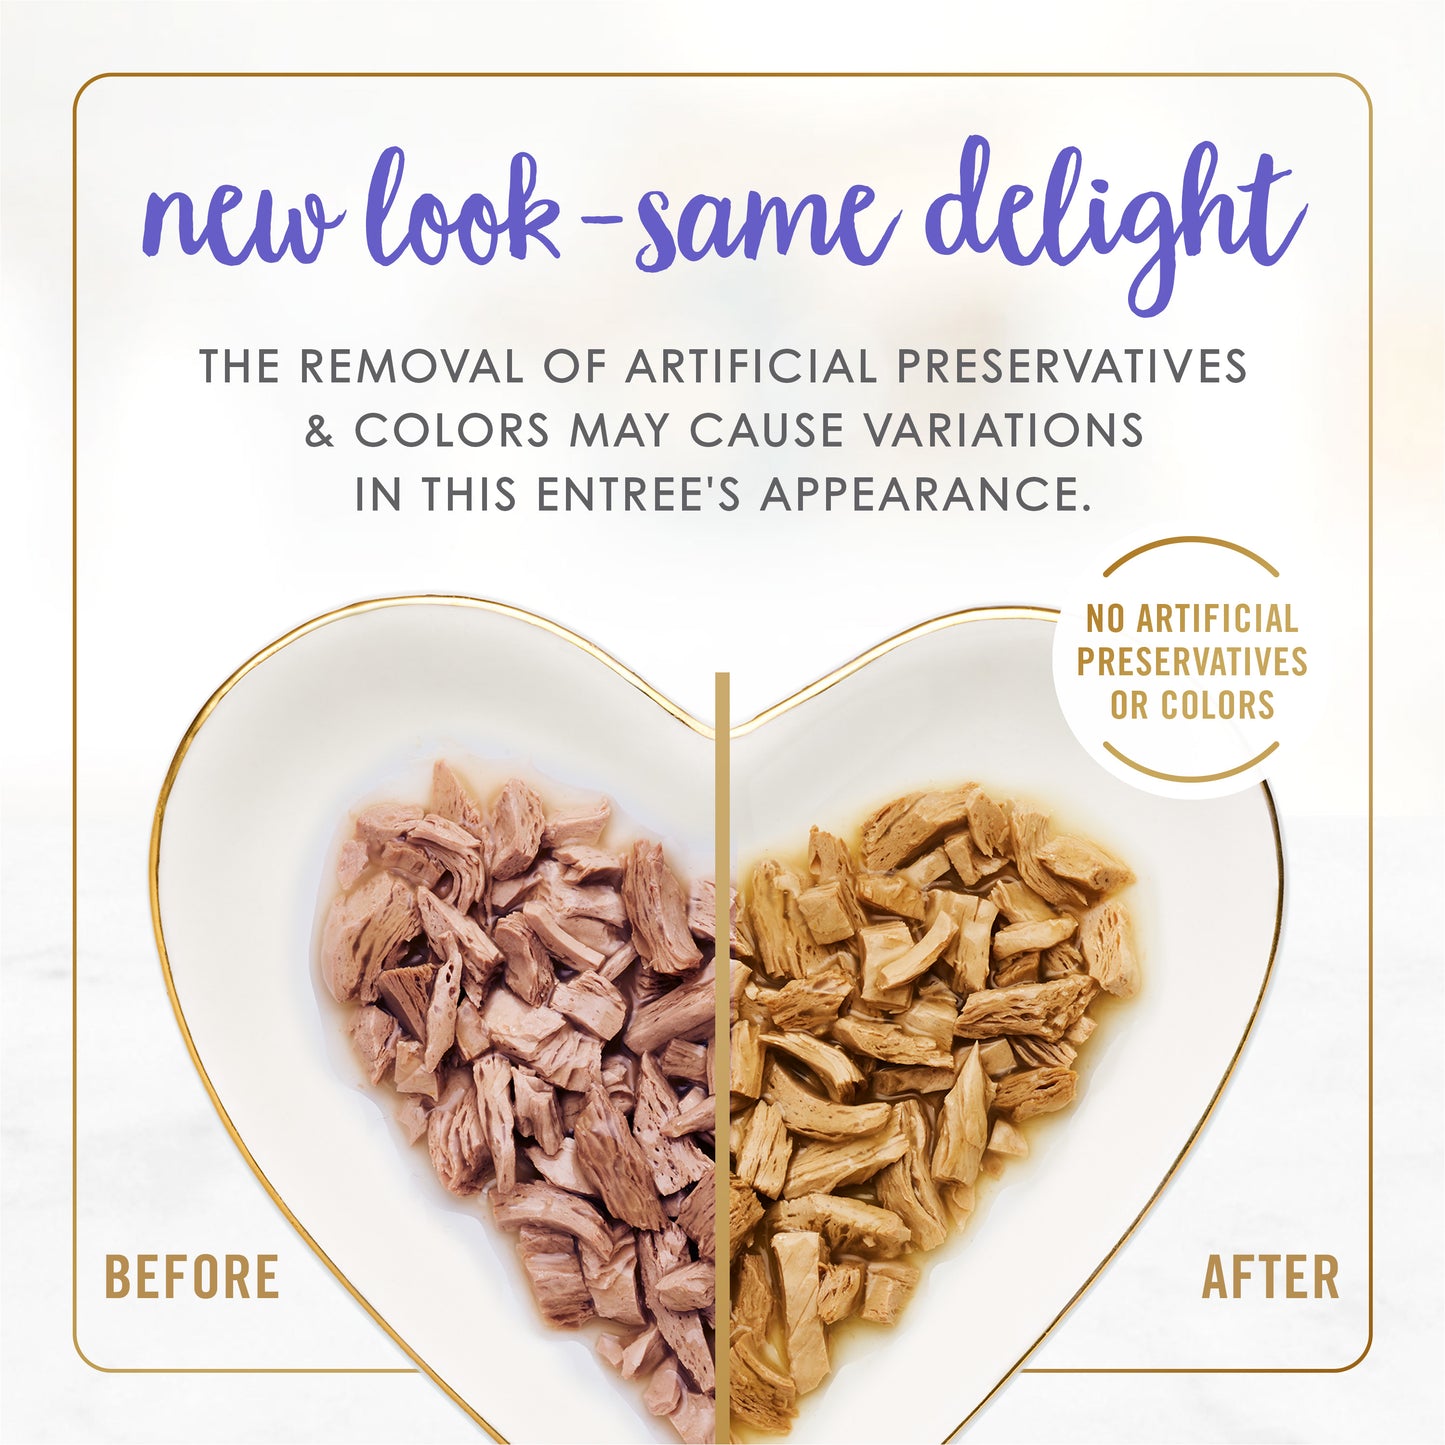 New look, same delight. The removal of artificial preservatives and colors may cause variations in this entree's appearance. No artificial preservatives or colors.